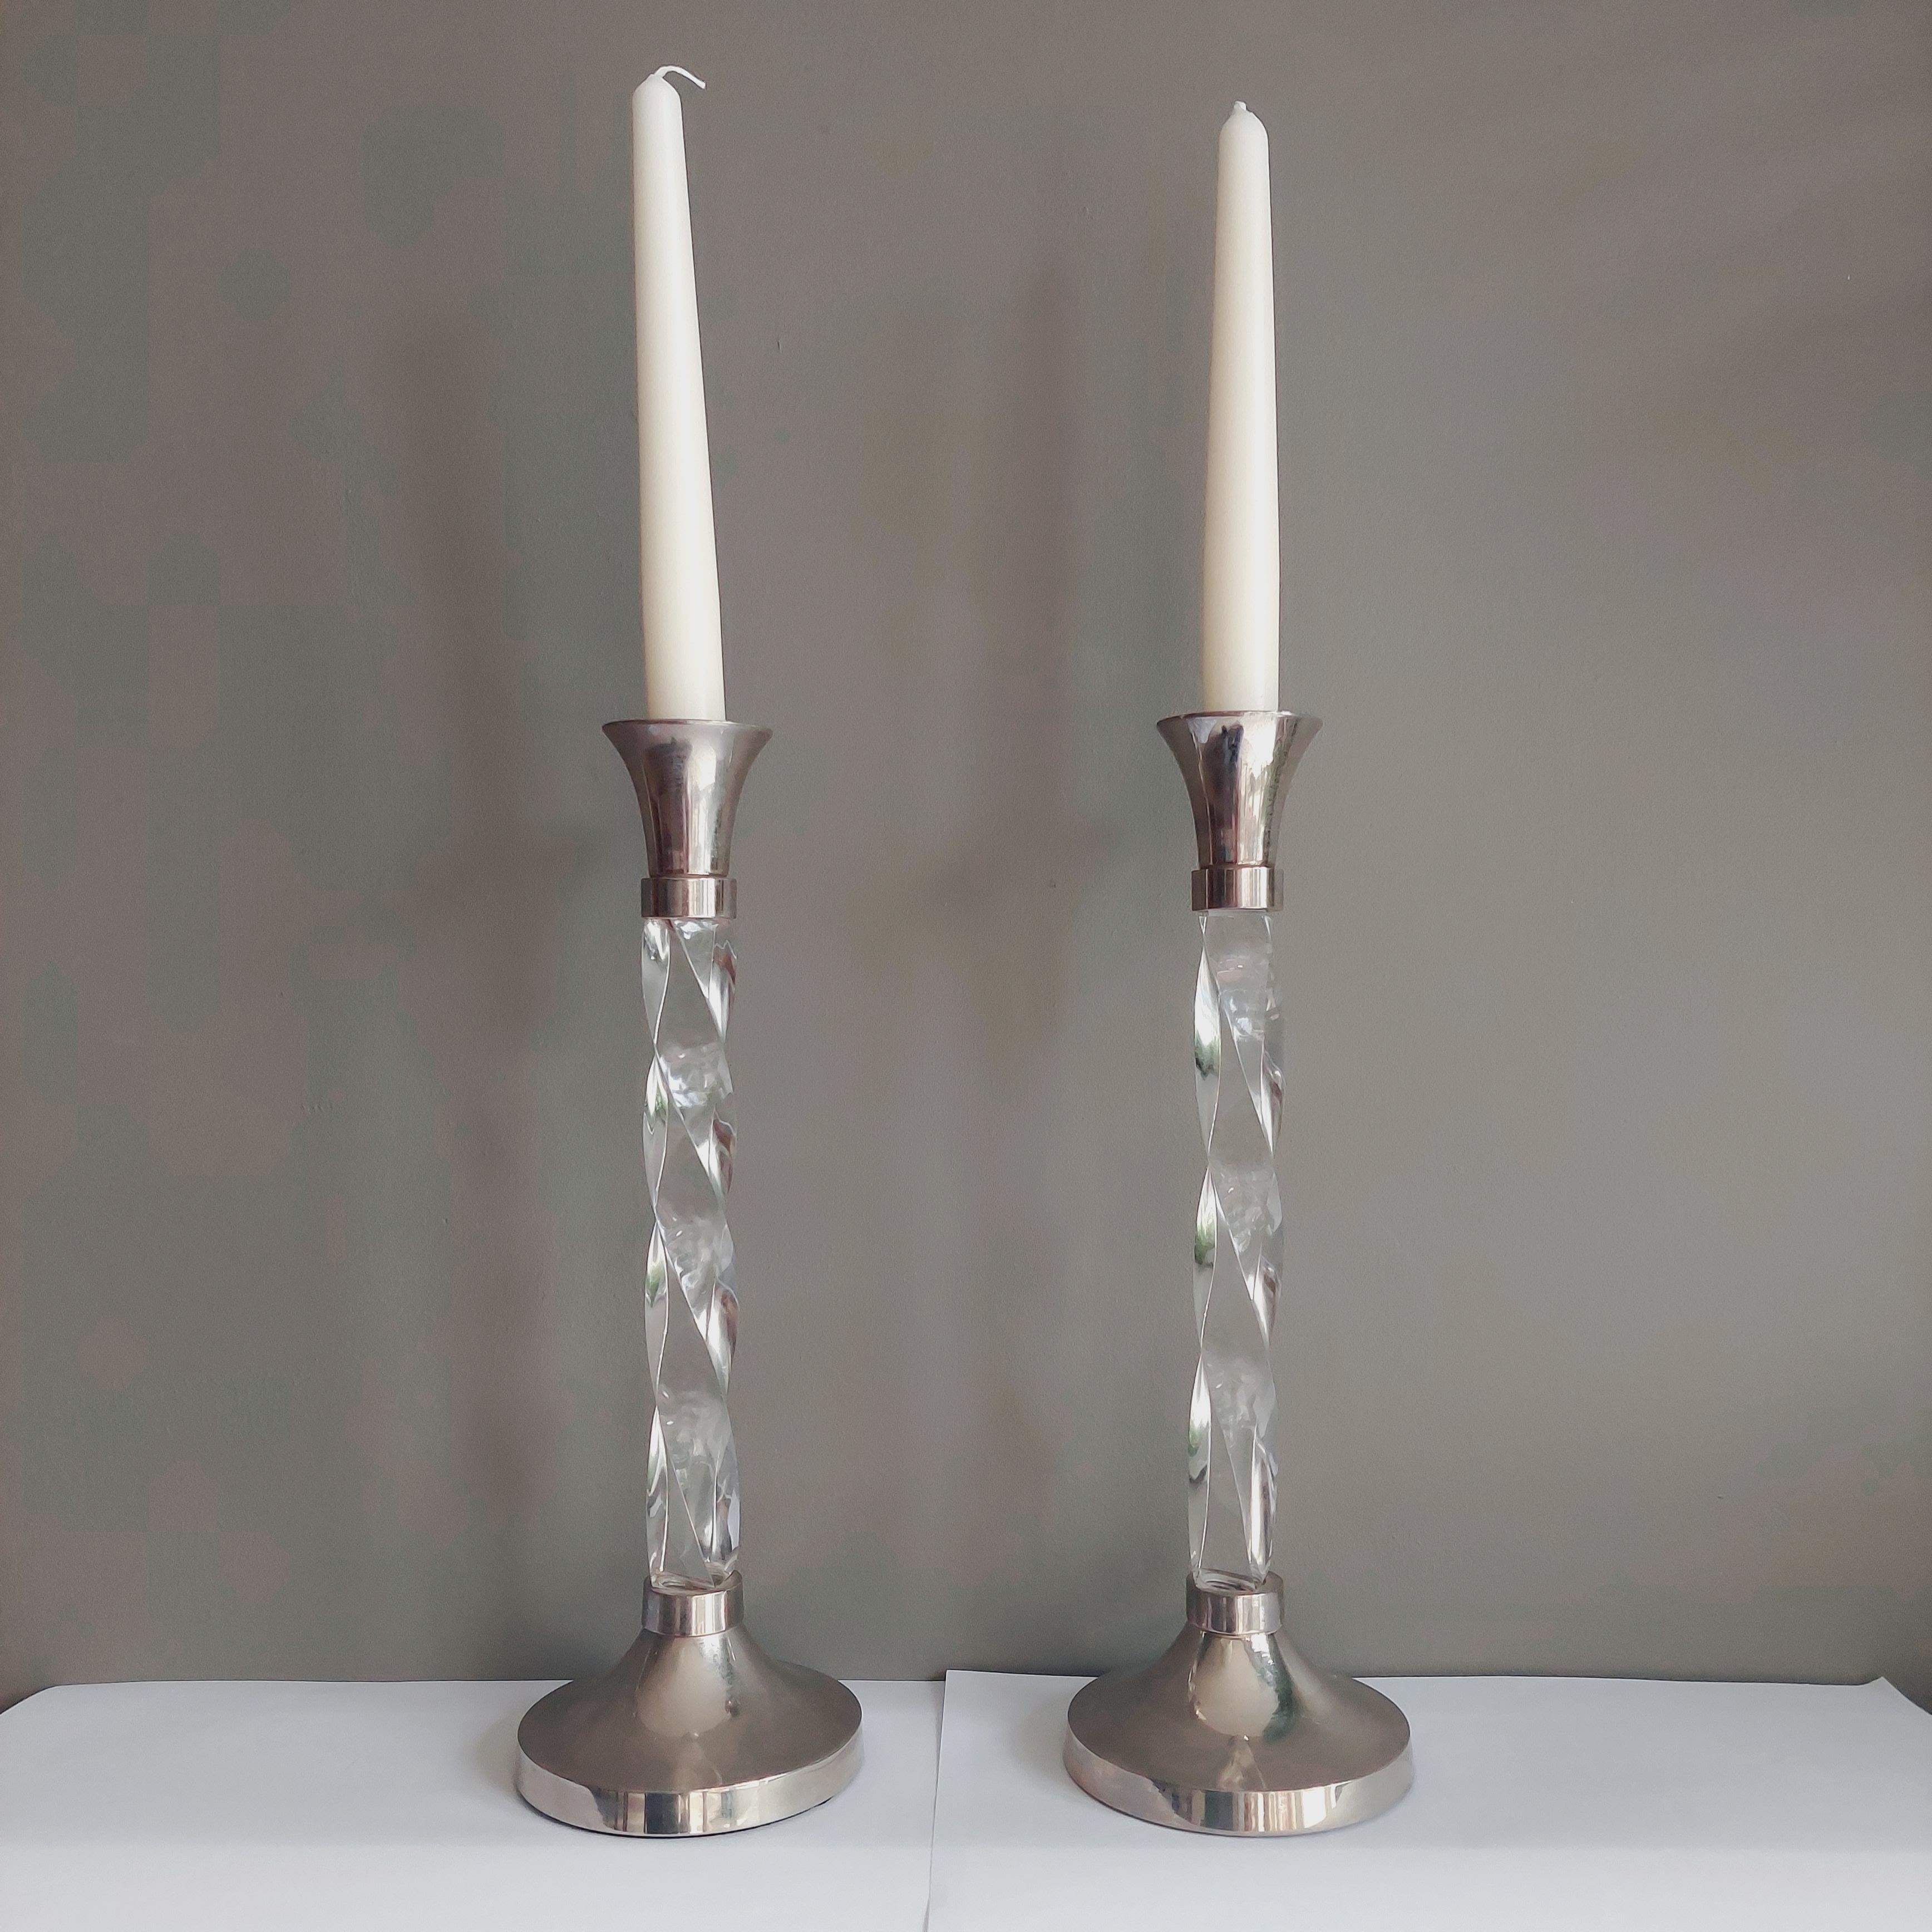 Pair of elegant 20th century stainless steel and Perspex candle sticks.
Beautiful vintage candlesticks in lucite and silver metal
Hollywood Regency / Contemporary candlesticks, with a chrome top and bottom, and awesome barley twist lucite acrylic